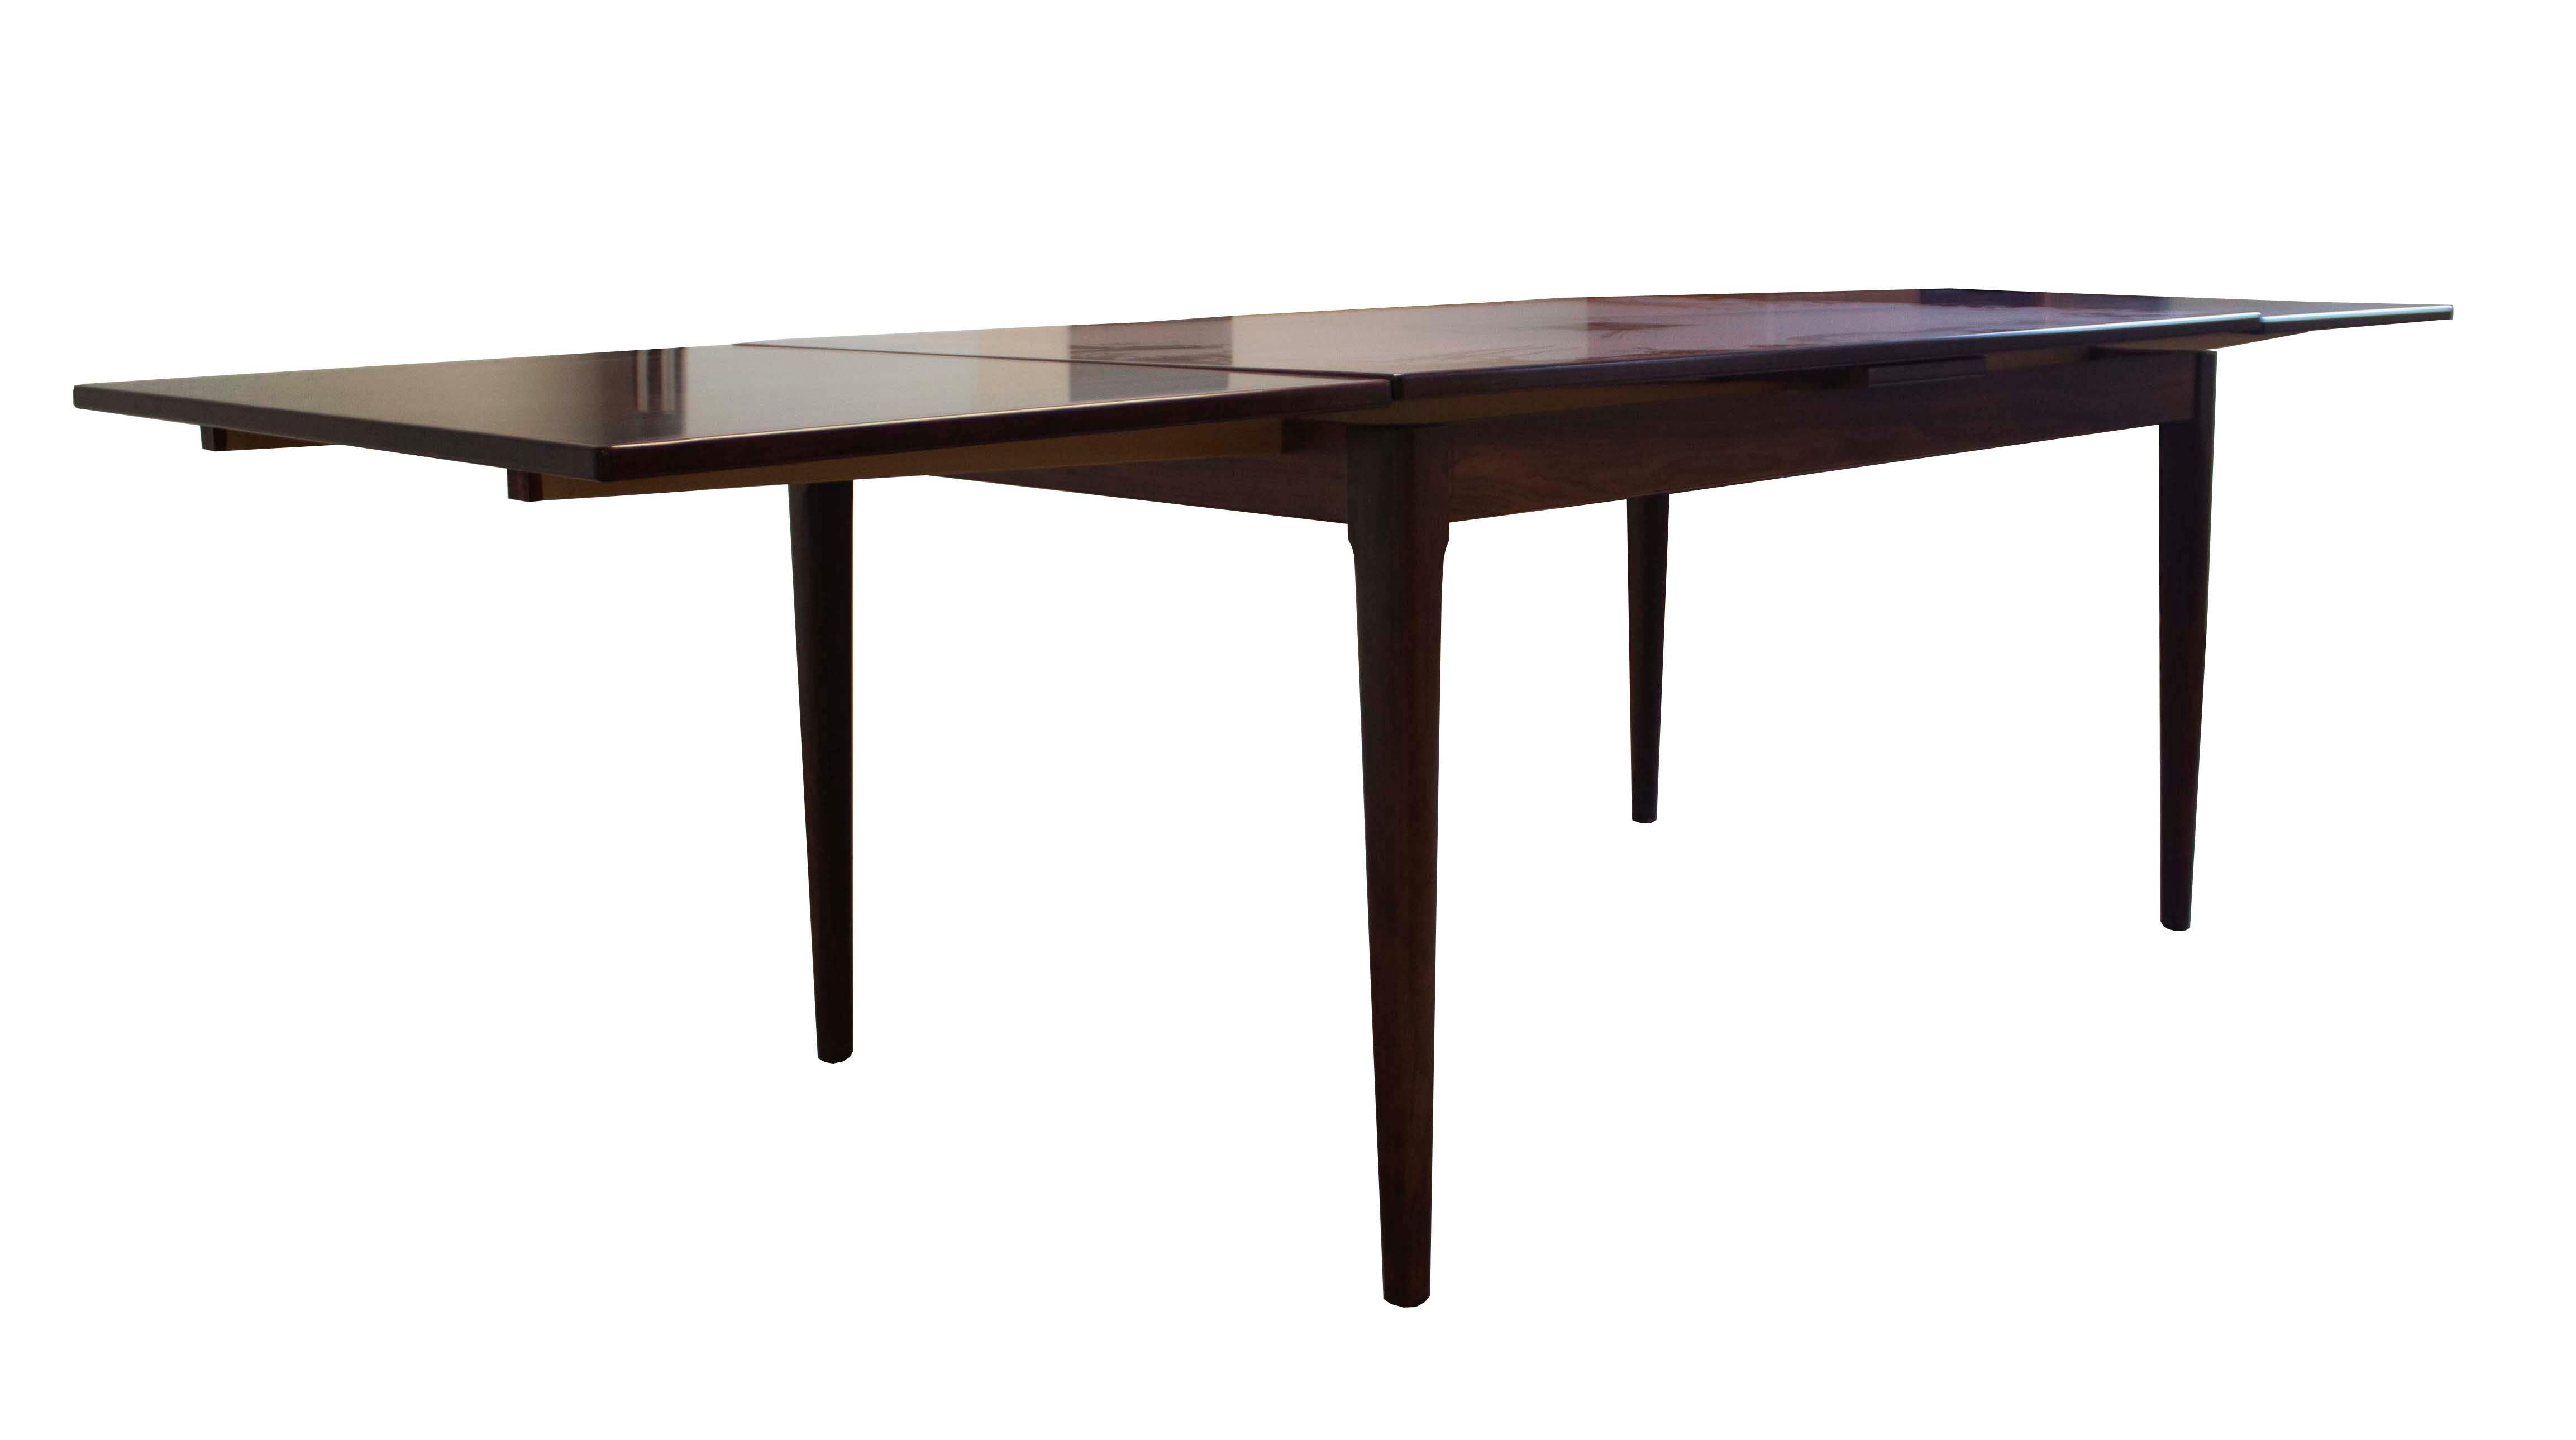 Late 20th Century Mid Century Danish Rosewood Dining Room Table & 6 Chairs by Svegard Markaryd